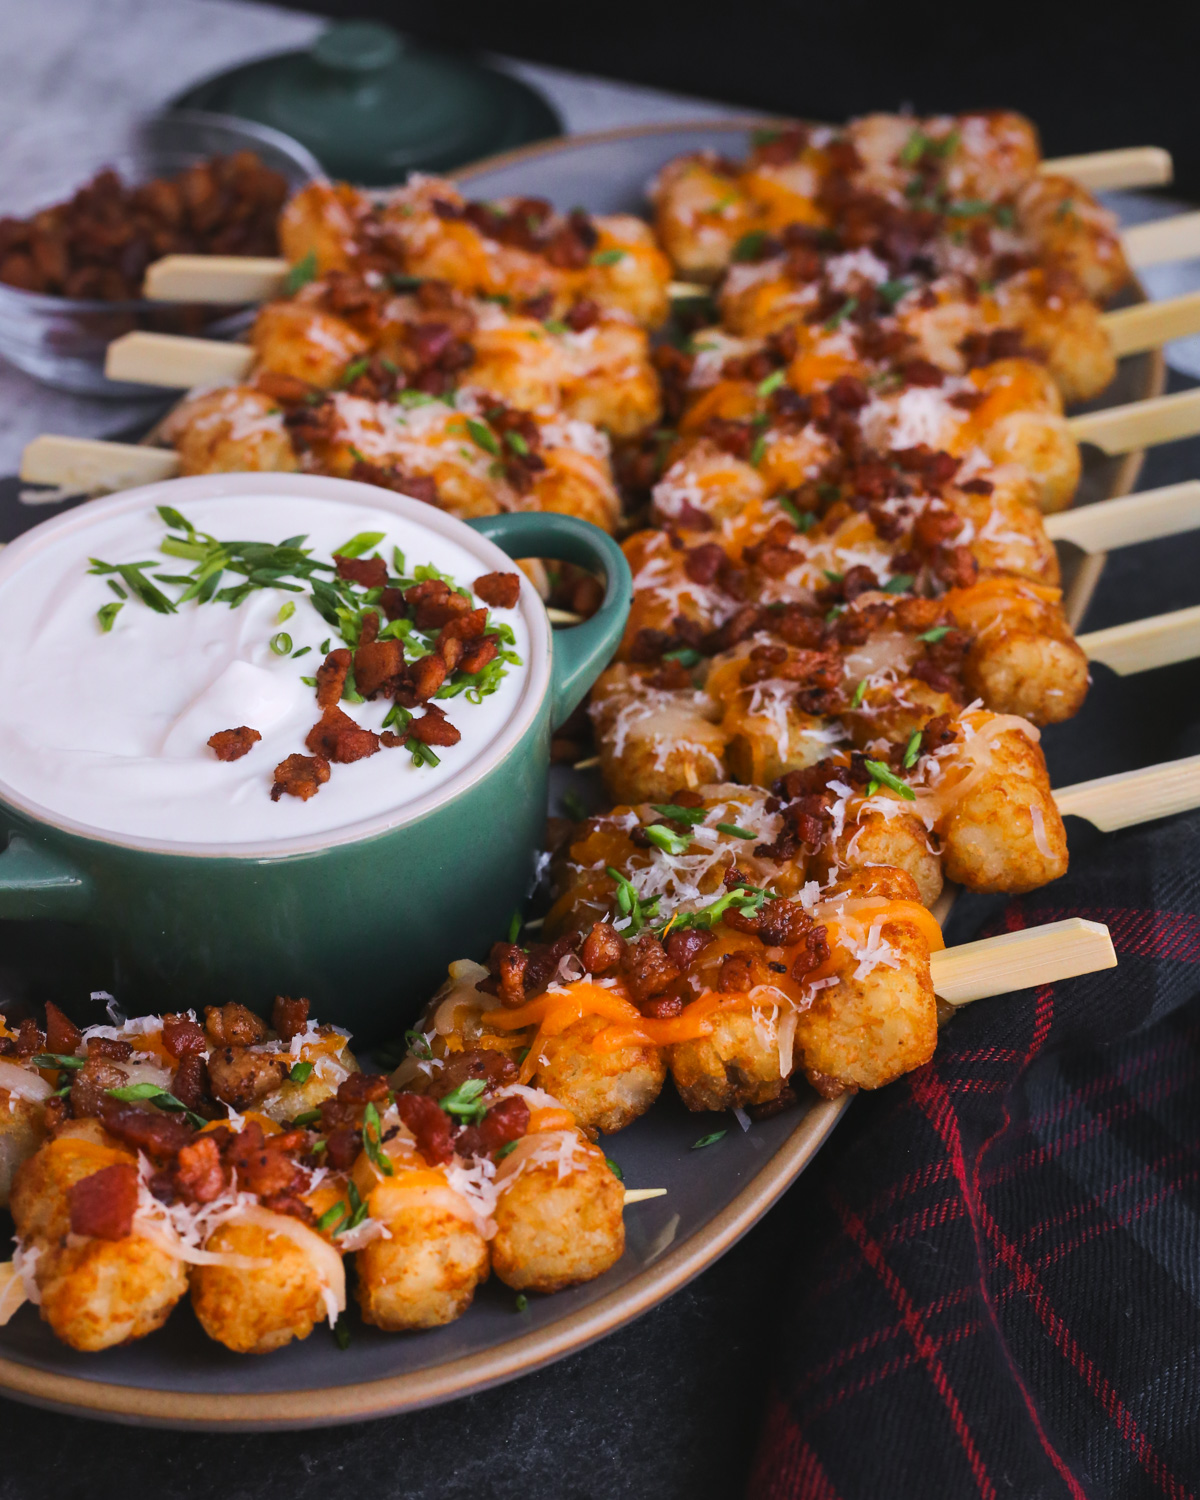 A serving platter with rows of loaded tater tots on skewers, served with a sour cream dipping sauce topped with sliced green onions and crispy bacon bits